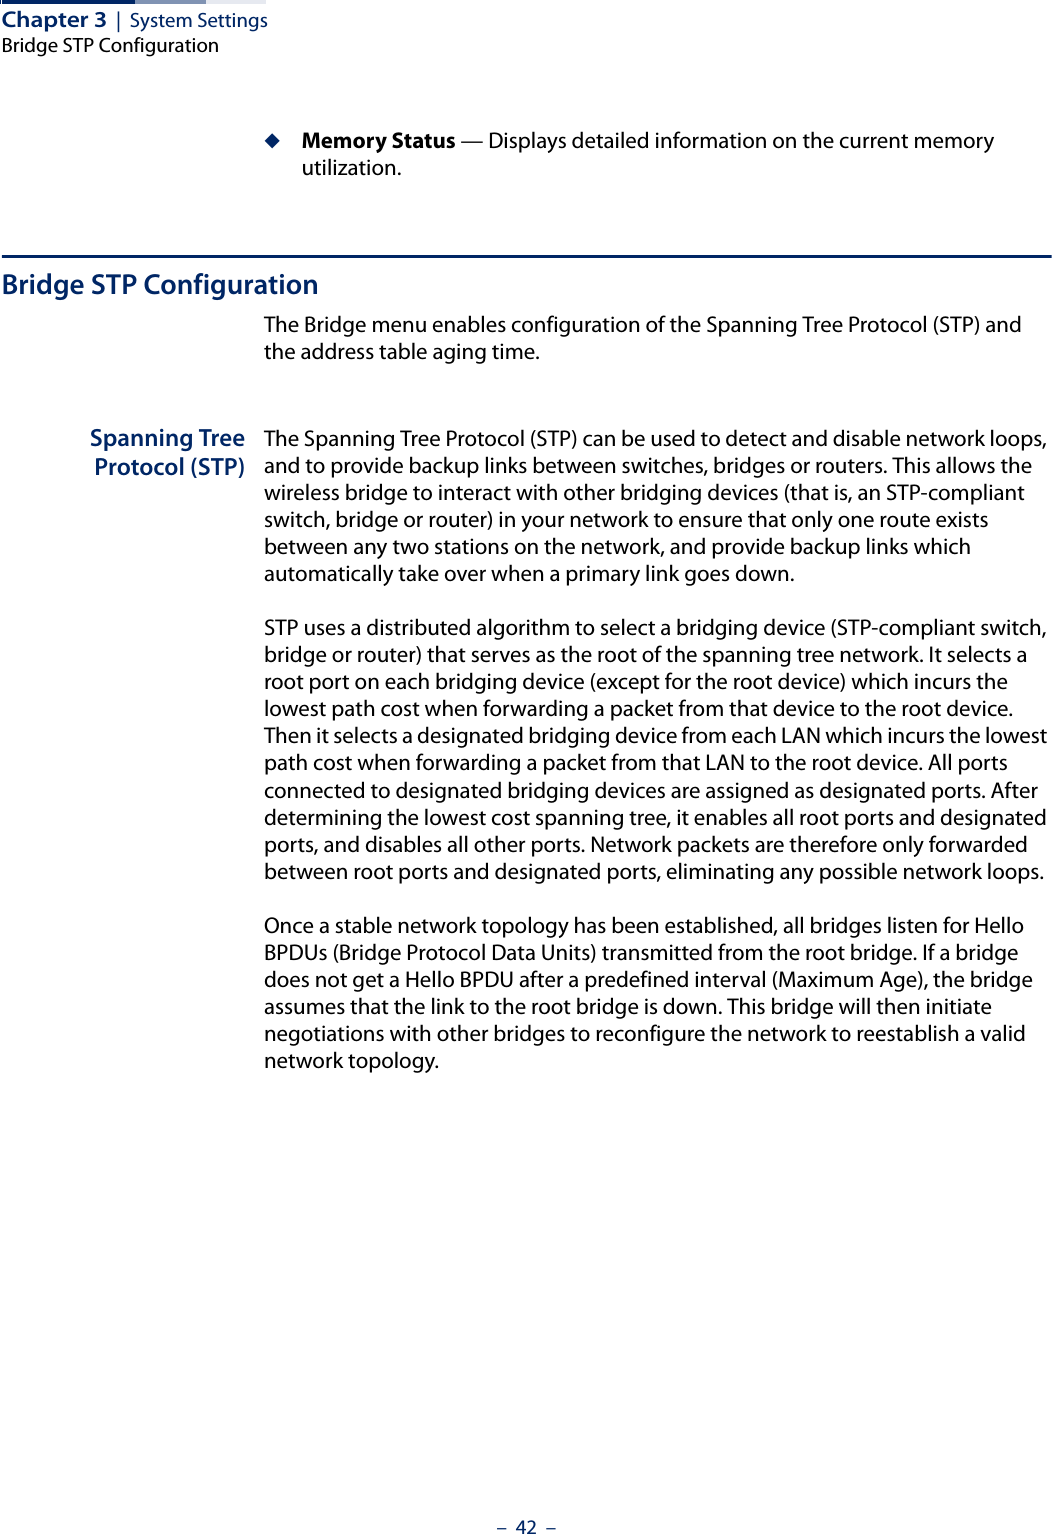 Chapter 3  |  System SettingsBridge STP Configuration–  42  –◆Memory Status — Displays detailed information on the current memory utilization.Bridge STP ConfigurationThe Bridge menu enables configuration of the Spanning Tree Protocol (STP) and the address table aging time.Spanning TreeProtocol (STP)The Spanning Tree Protocol (STP) can be used to detect and disable network loops, and to provide backup links between switches, bridges or routers. This allows the wireless bridge to interact with other bridging devices (that is, an STP-compliant switch, bridge or router) in your network to ensure that only one route exists between any two stations on the network, and provide backup links which automatically take over when a primary link goes down.STP uses a distributed algorithm to select a bridging device (STP-compliant switch, bridge or router) that serves as the root of the spanning tree network. It selects a root port on each bridging device (except for the root device) which incurs the lowest path cost when forwarding a packet from that device to the root device. Then it selects a designated bridging device from each LAN which incurs the lowest path cost when forwarding a packet from that LAN to the root device. All ports connected to designated bridging devices are assigned as designated ports. After determining the lowest cost spanning tree, it enables all root ports and designated ports, and disables all other ports. Network packets are therefore only forwarded between root ports and designated ports, eliminating any possible network loops.Once a stable network topology has been established, all bridges listen for Hello BPDUs (Bridge Protocol Data Units) transmitted from the root bridge. If a bridge does not get a Hello BPDU after a predefined interval (Maximum Age), the bridge assumes that the link to the root bridge is down. This bridge will then initiate negotiations with other bridges to reconfigure the network to reestablish a valid network topology.